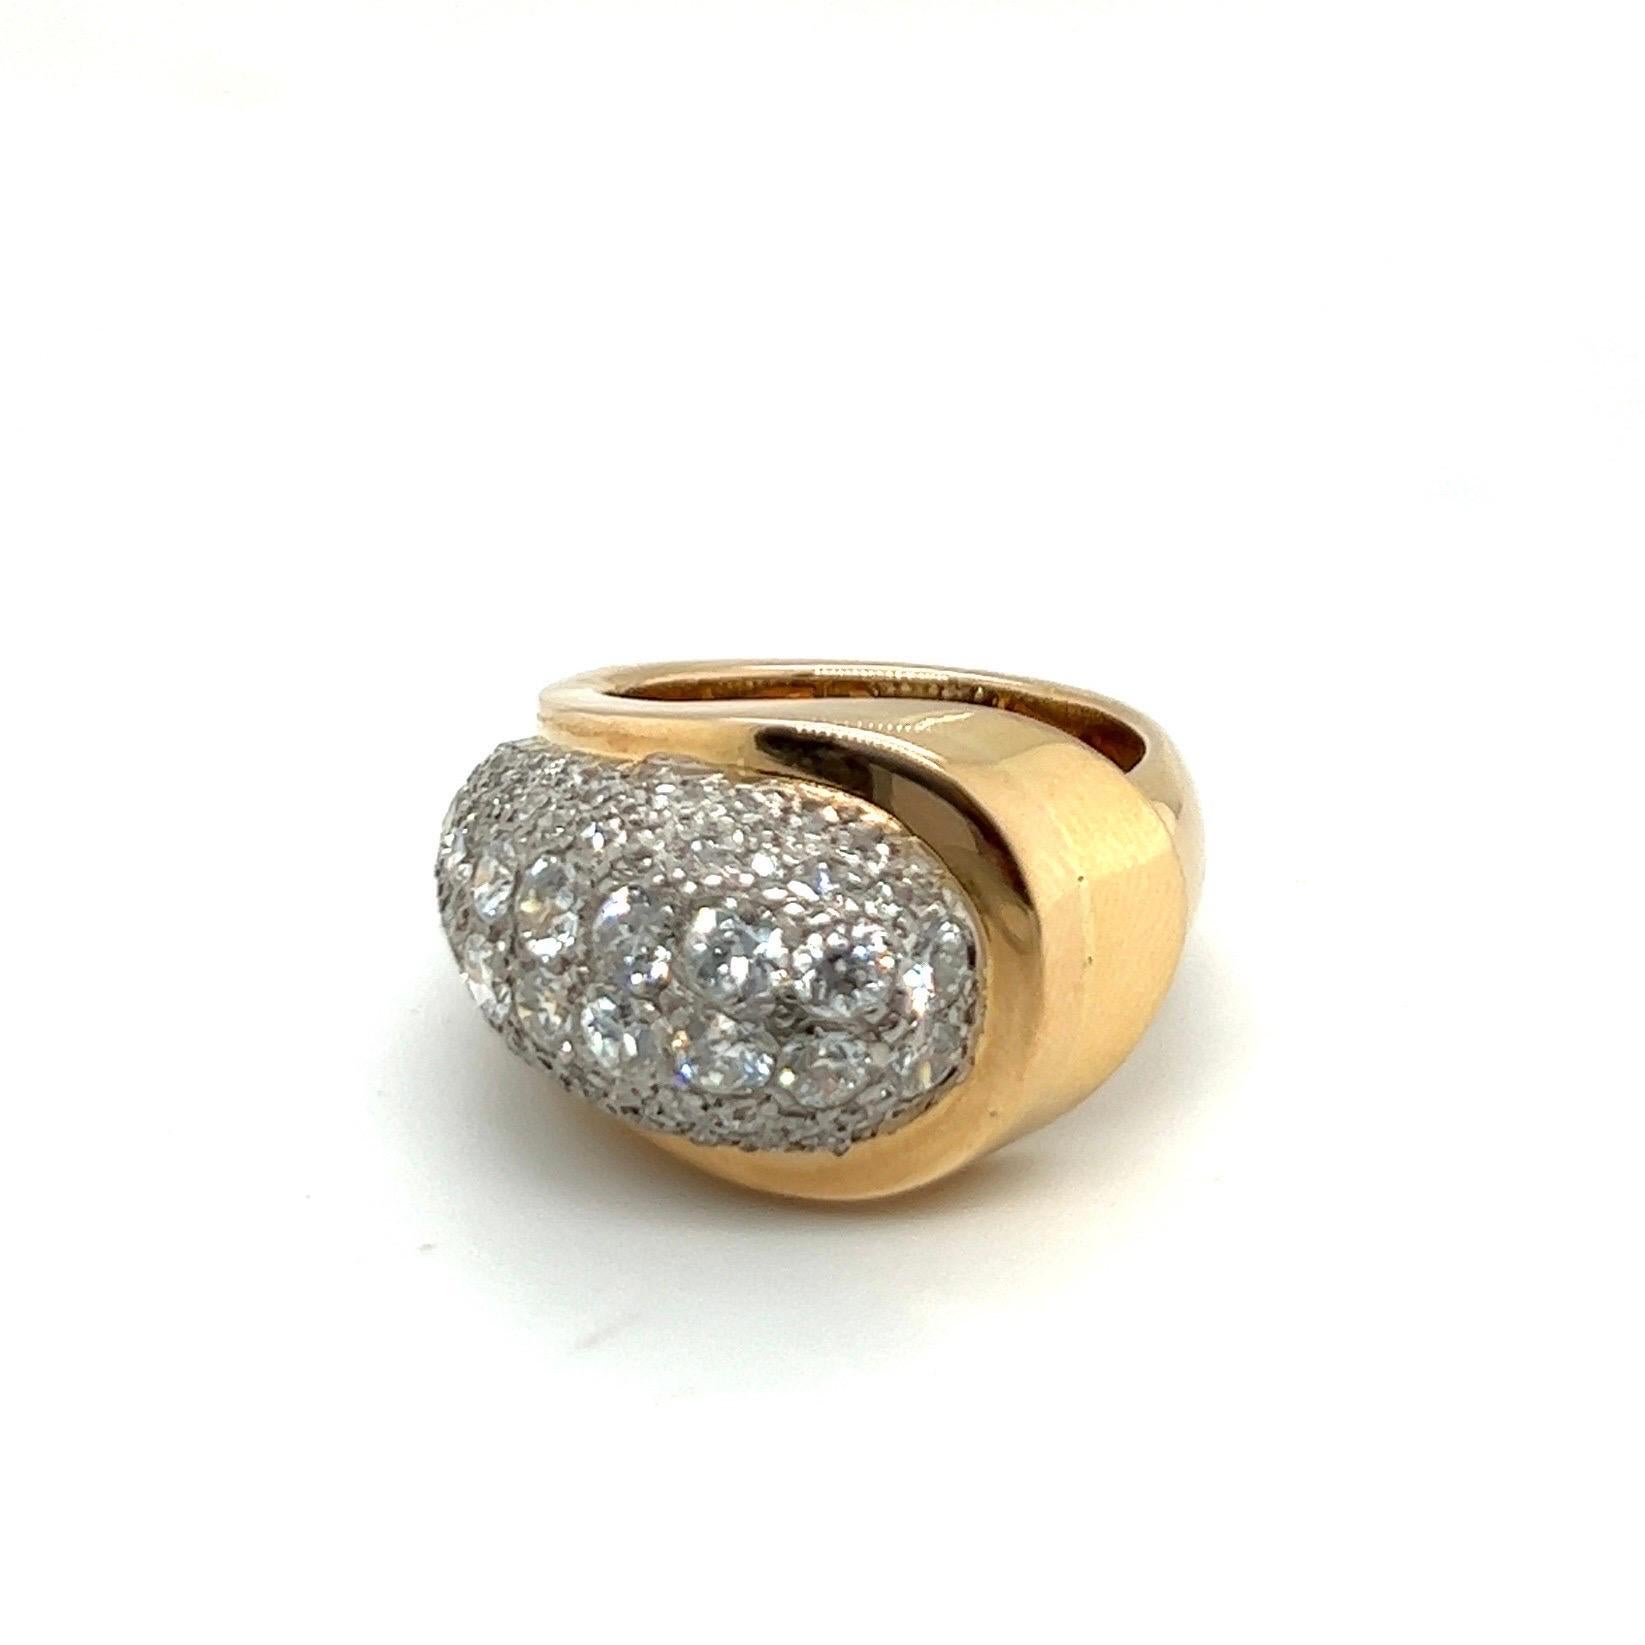 Ravishing 18 karat yellow gold, platinum and diamond Retro dress ring from the 1940s.

Eye-catching bombé band ring of asymmetrical design, crafted in 18 karat yellow gold and platinum and pavé-set with numerous single-cut and old-cut diamonds